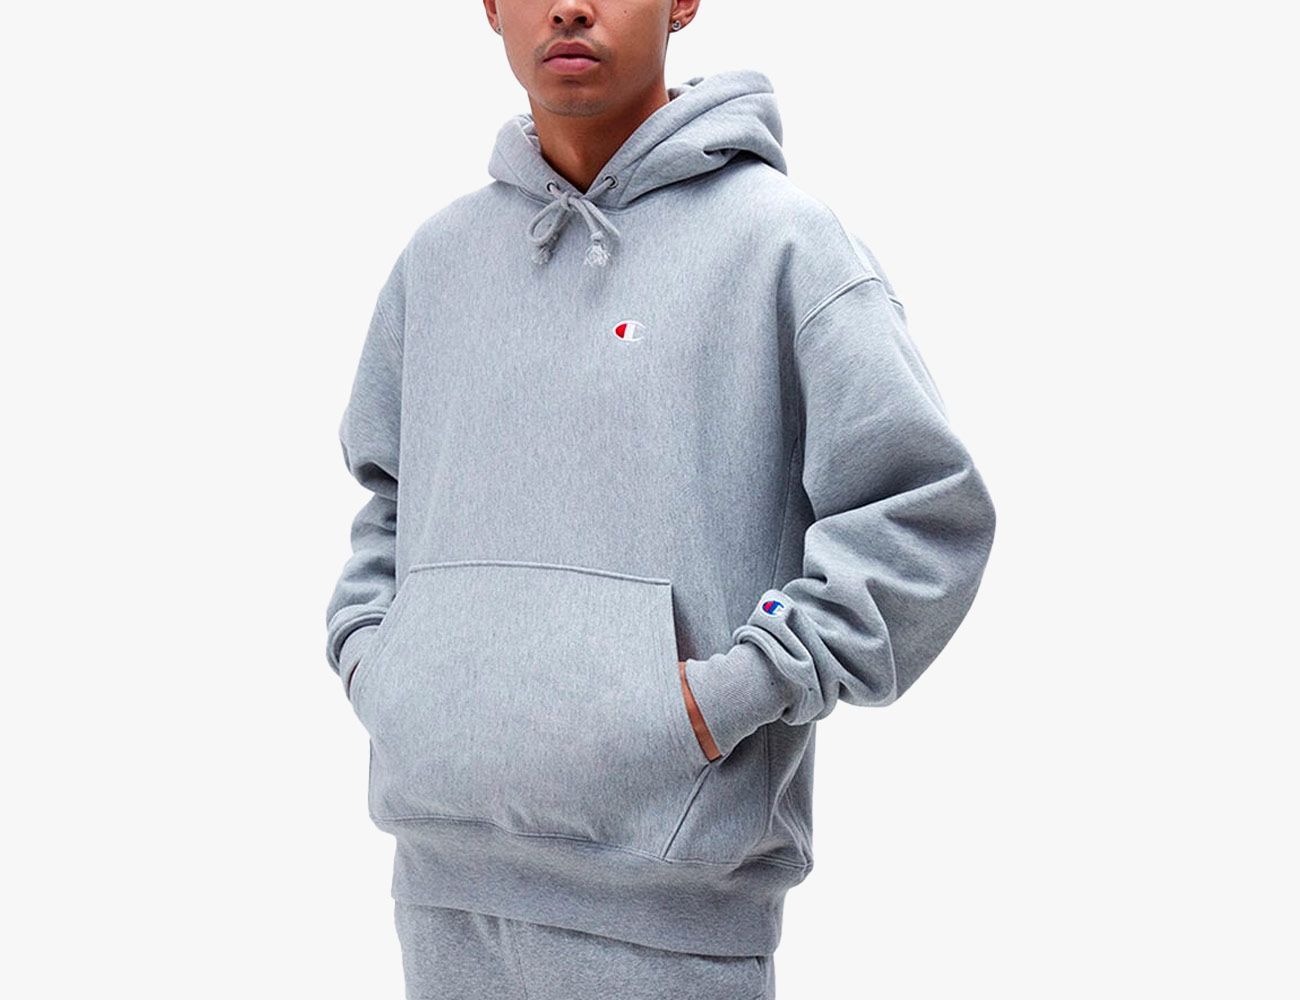 Best Hoodies For Men 2022: Guide On Different Types Of Mens' Hoodies